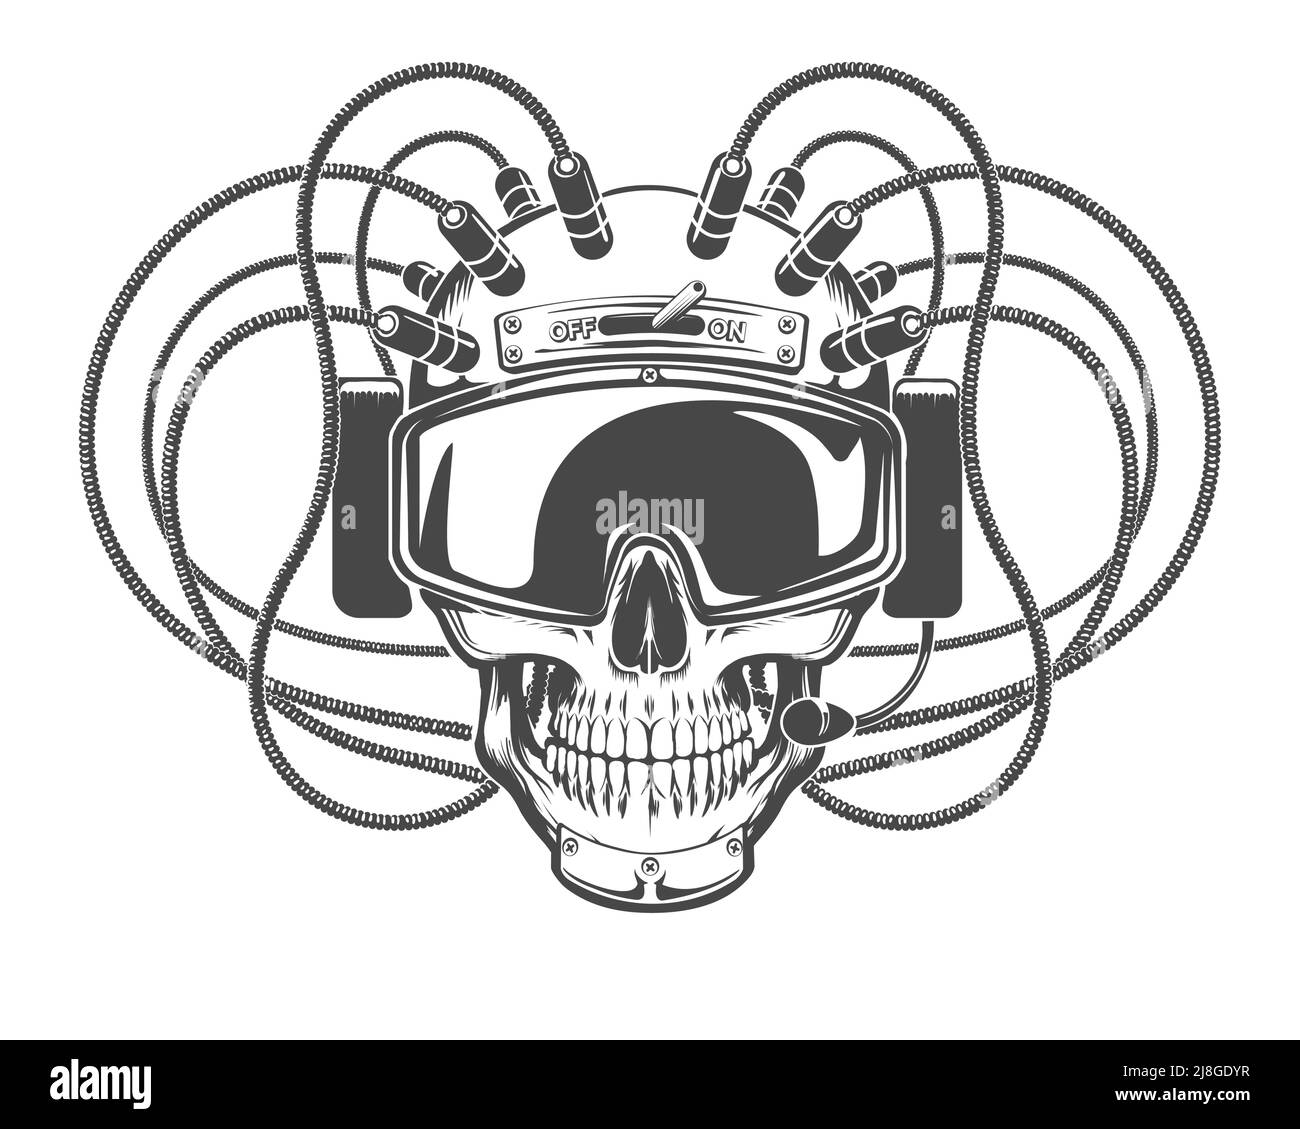 Tattoo of Cyber skull in headphones and virtual reality headset isolated on white background. Vector illustration. Stock Vector